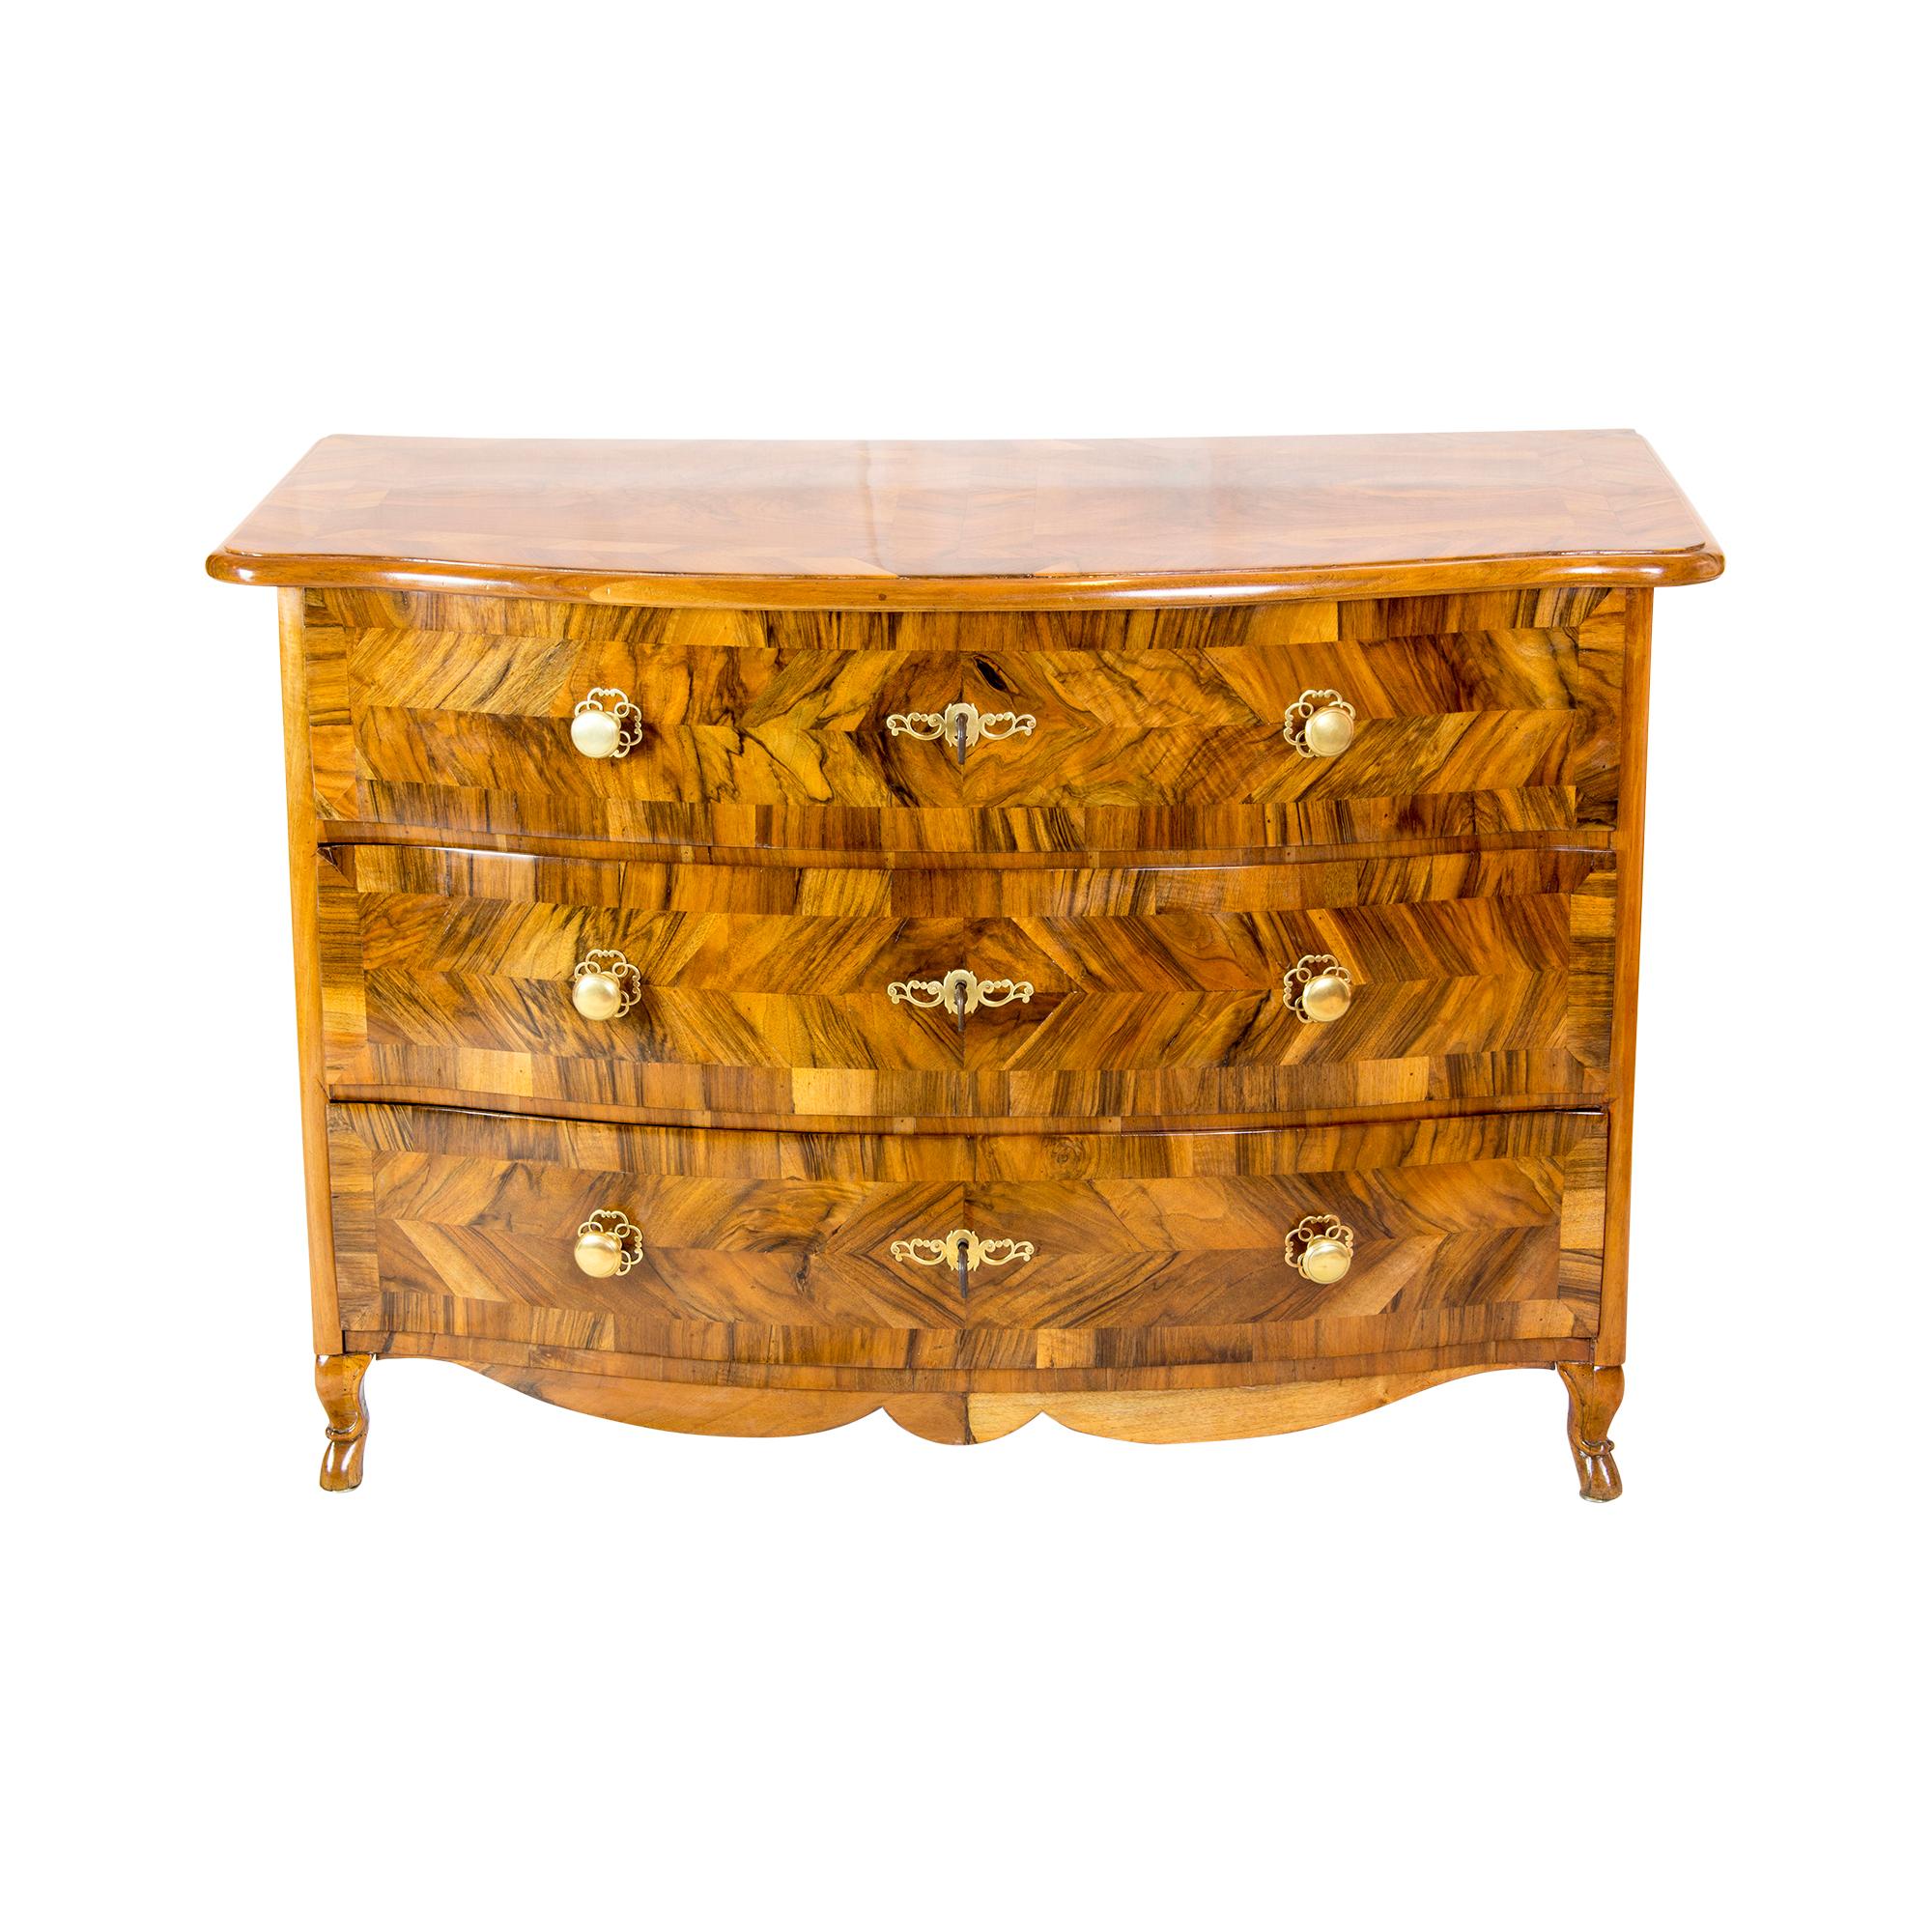 The baroque chest of drawers dates from the 18th century. The front and the lid of the chest of drawers are veneered with walnut marquetry on spruce. The sides are solid walnut. The locks and the fittings are original. The locks are functional. The